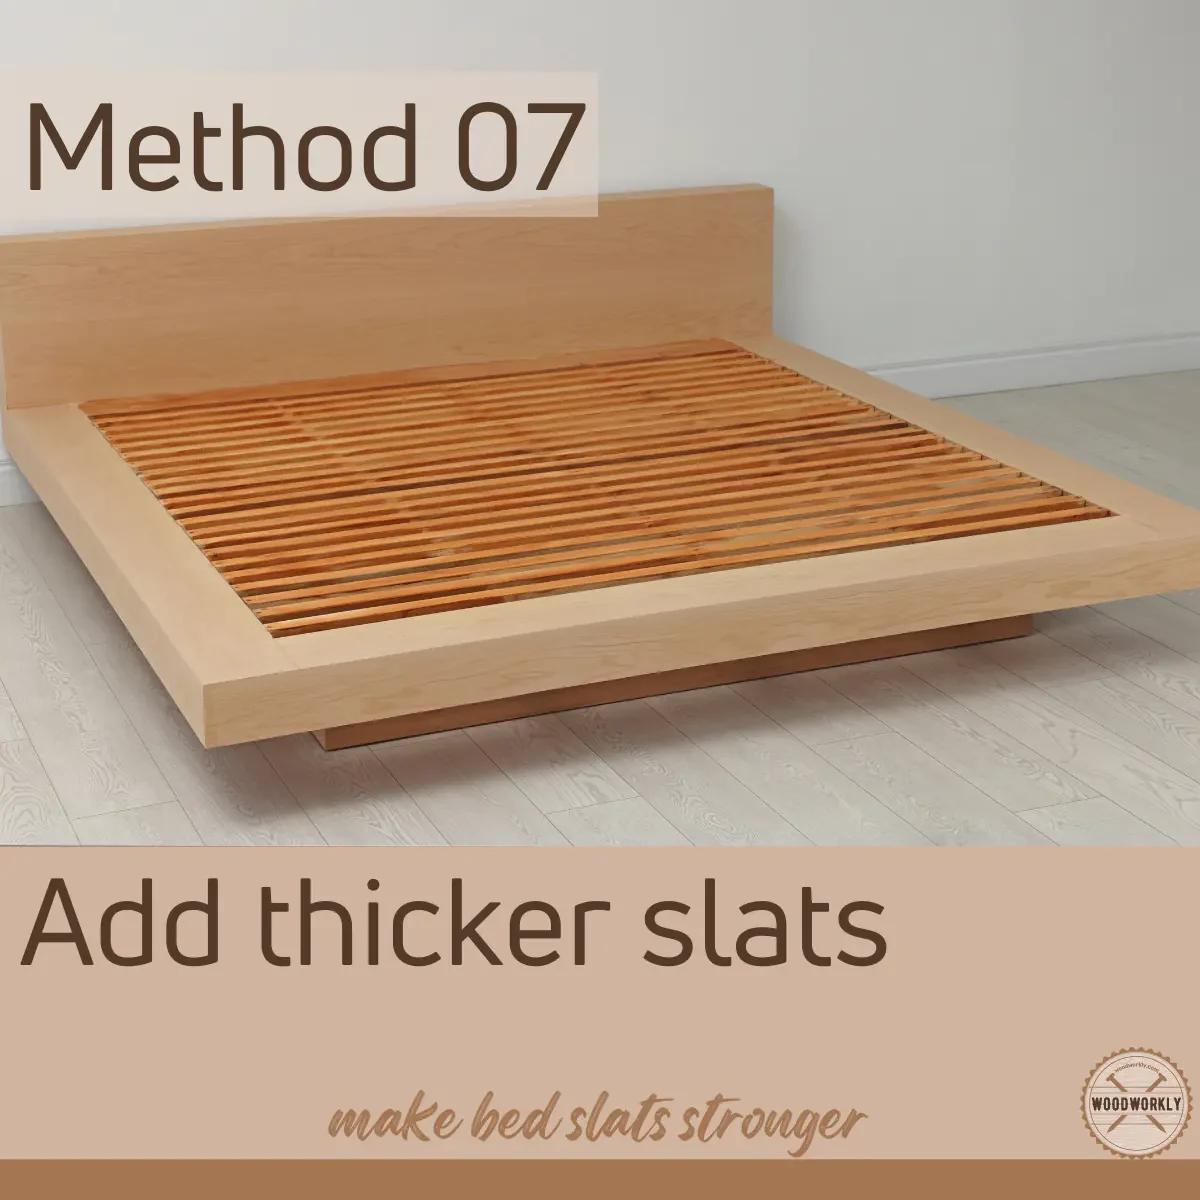 add thicker bed slats to make slats stronger